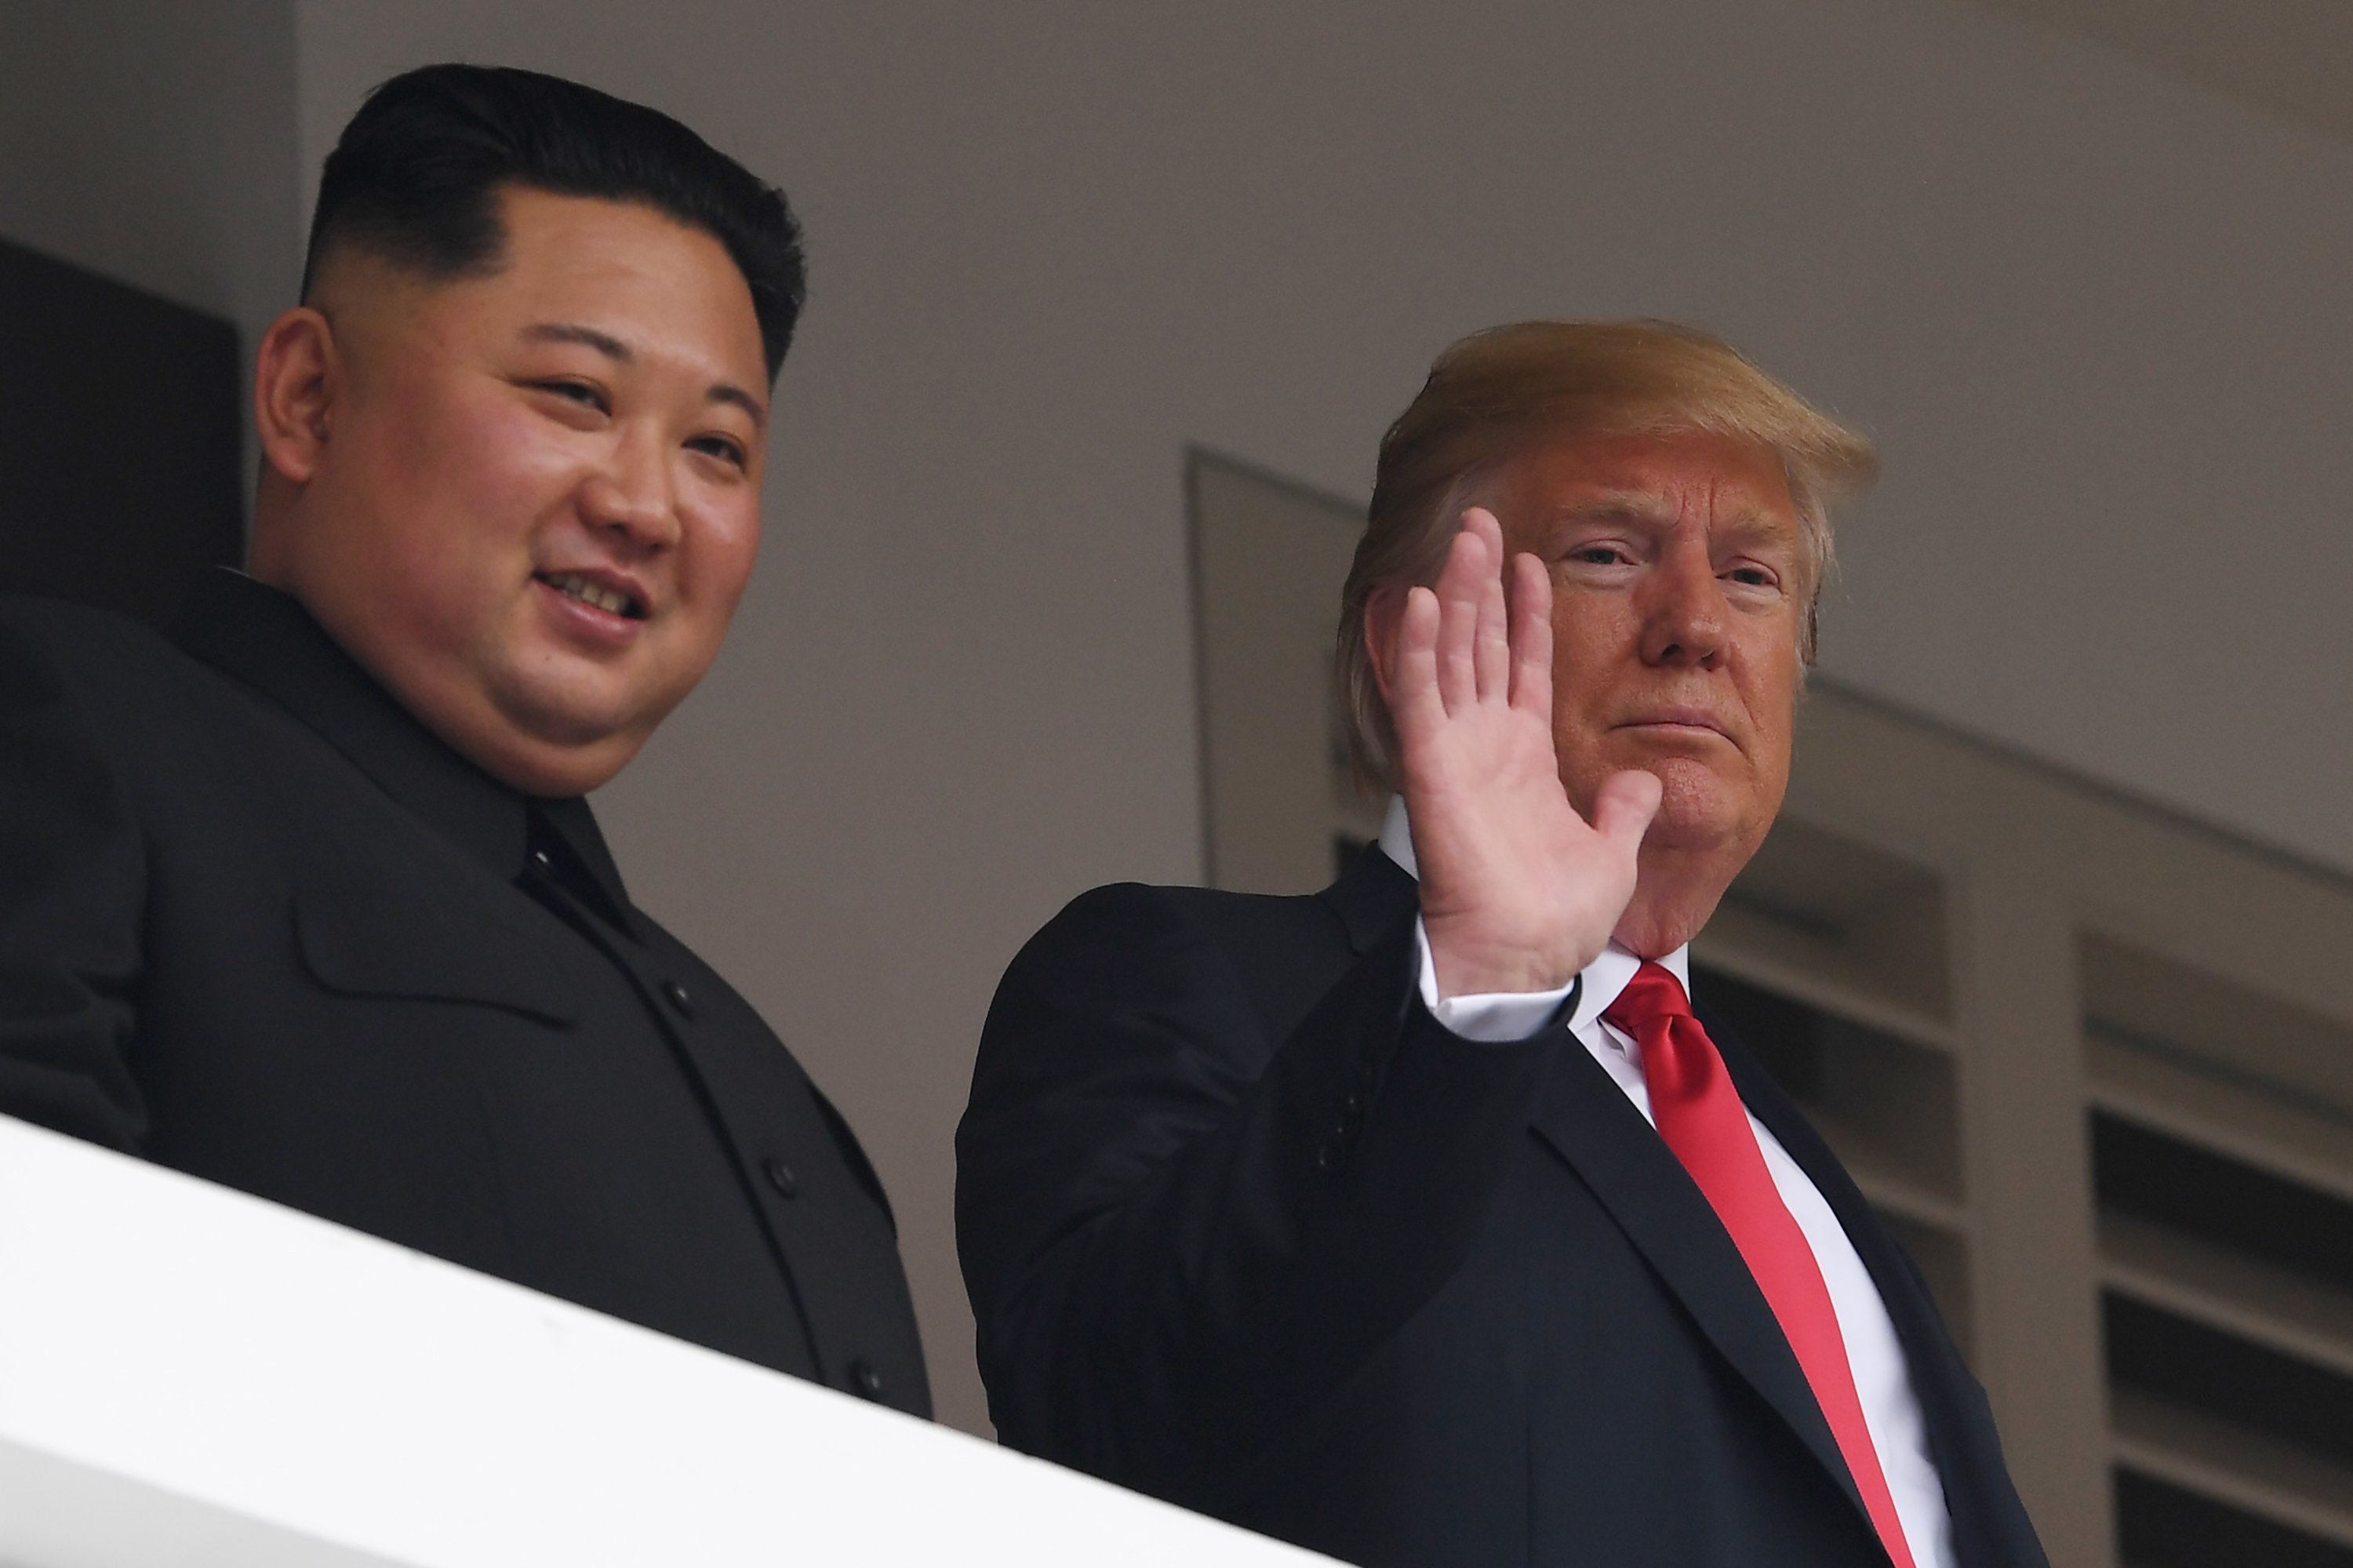 June 12: US President Donald Trump waves as he and North Korea's leader Kim Jong Un look on from a veranda during their historic US-North Korea summit in Singapore (Saul Loeb—AFP/Getty Images)